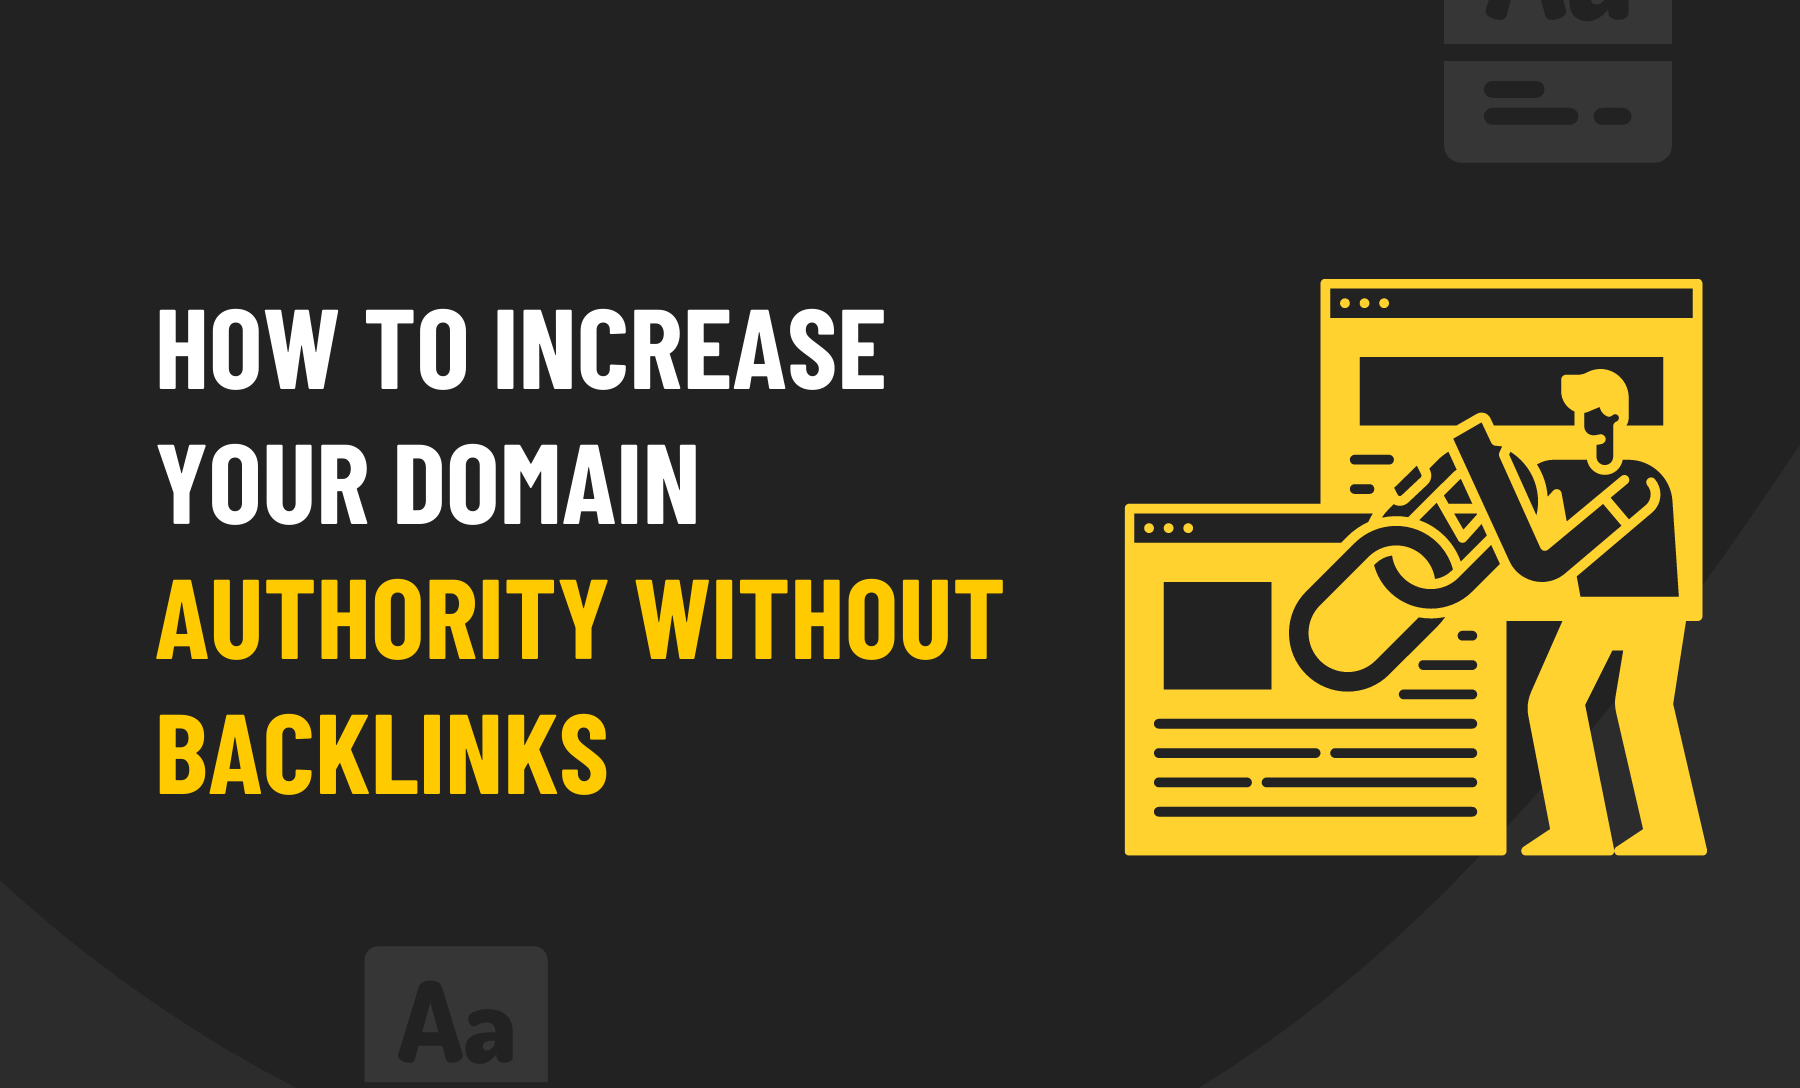 How to increase your domain Authority without backlinks